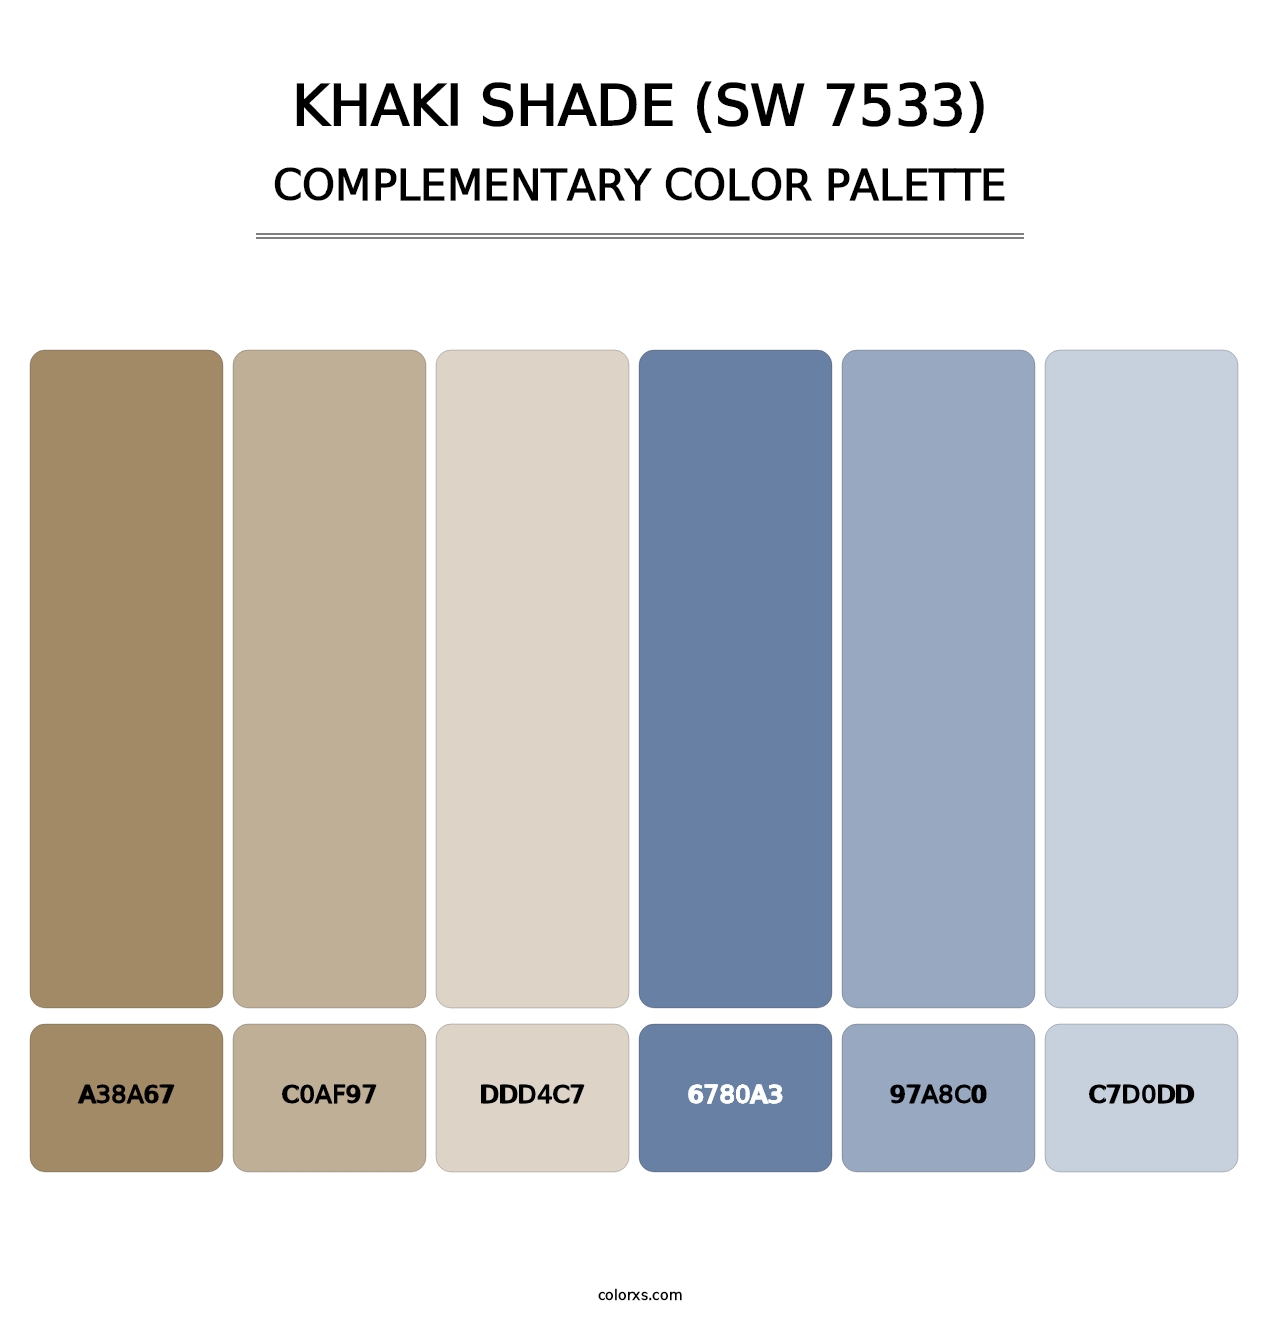 Khaki Shade (SW 7533) - Complementary Color Palette